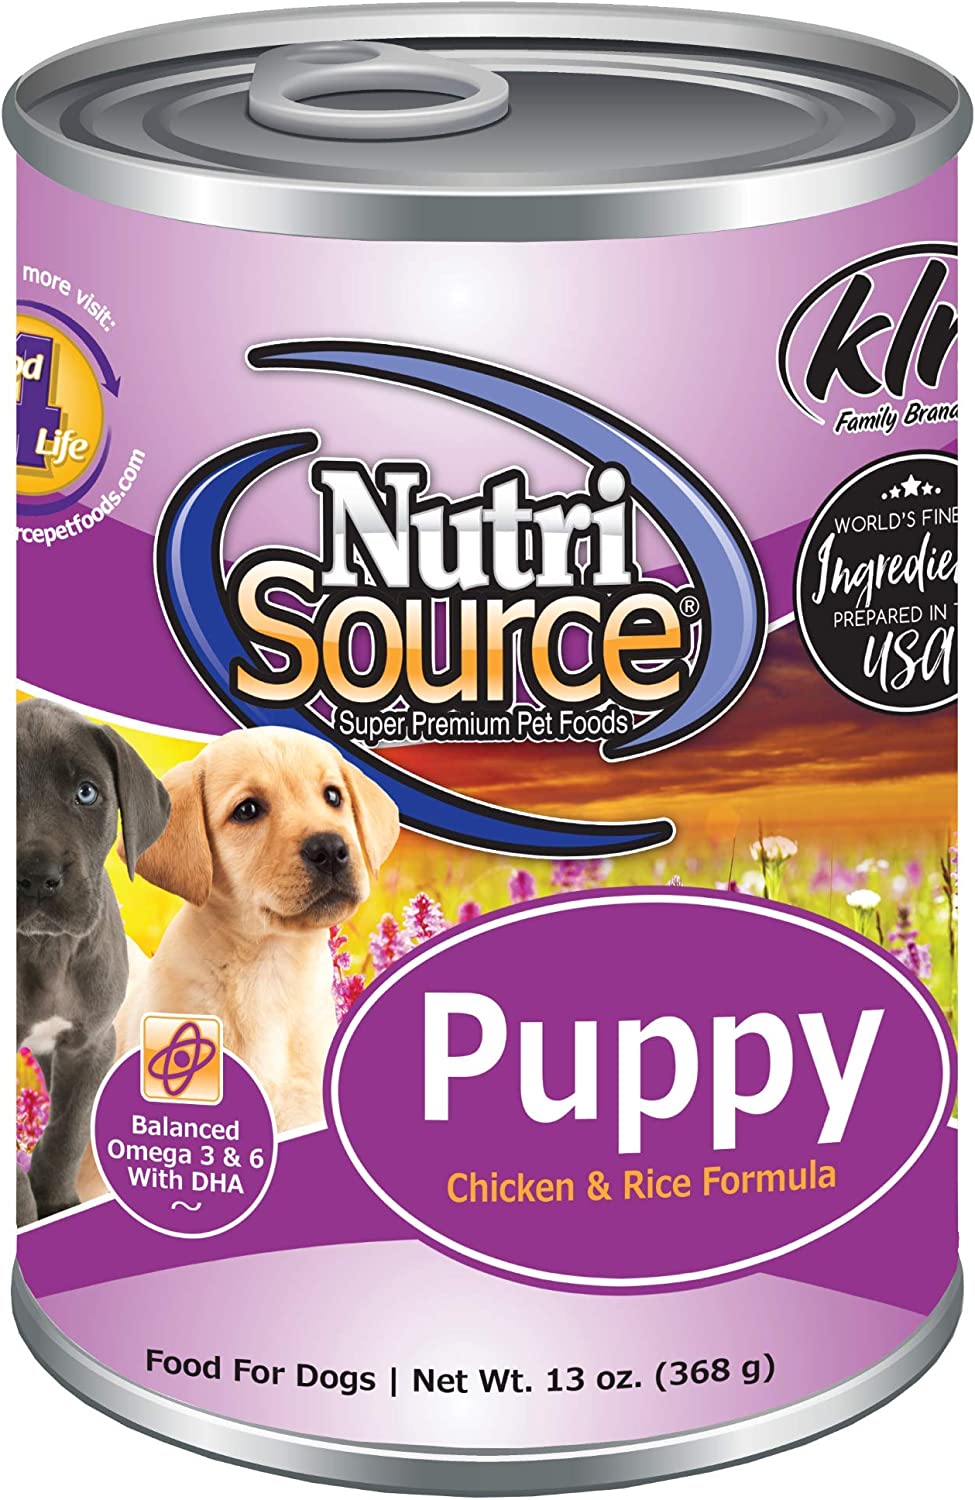 Nutri Source Puppy Chicken & Rice Case of Canned Dog Food 12/13oz